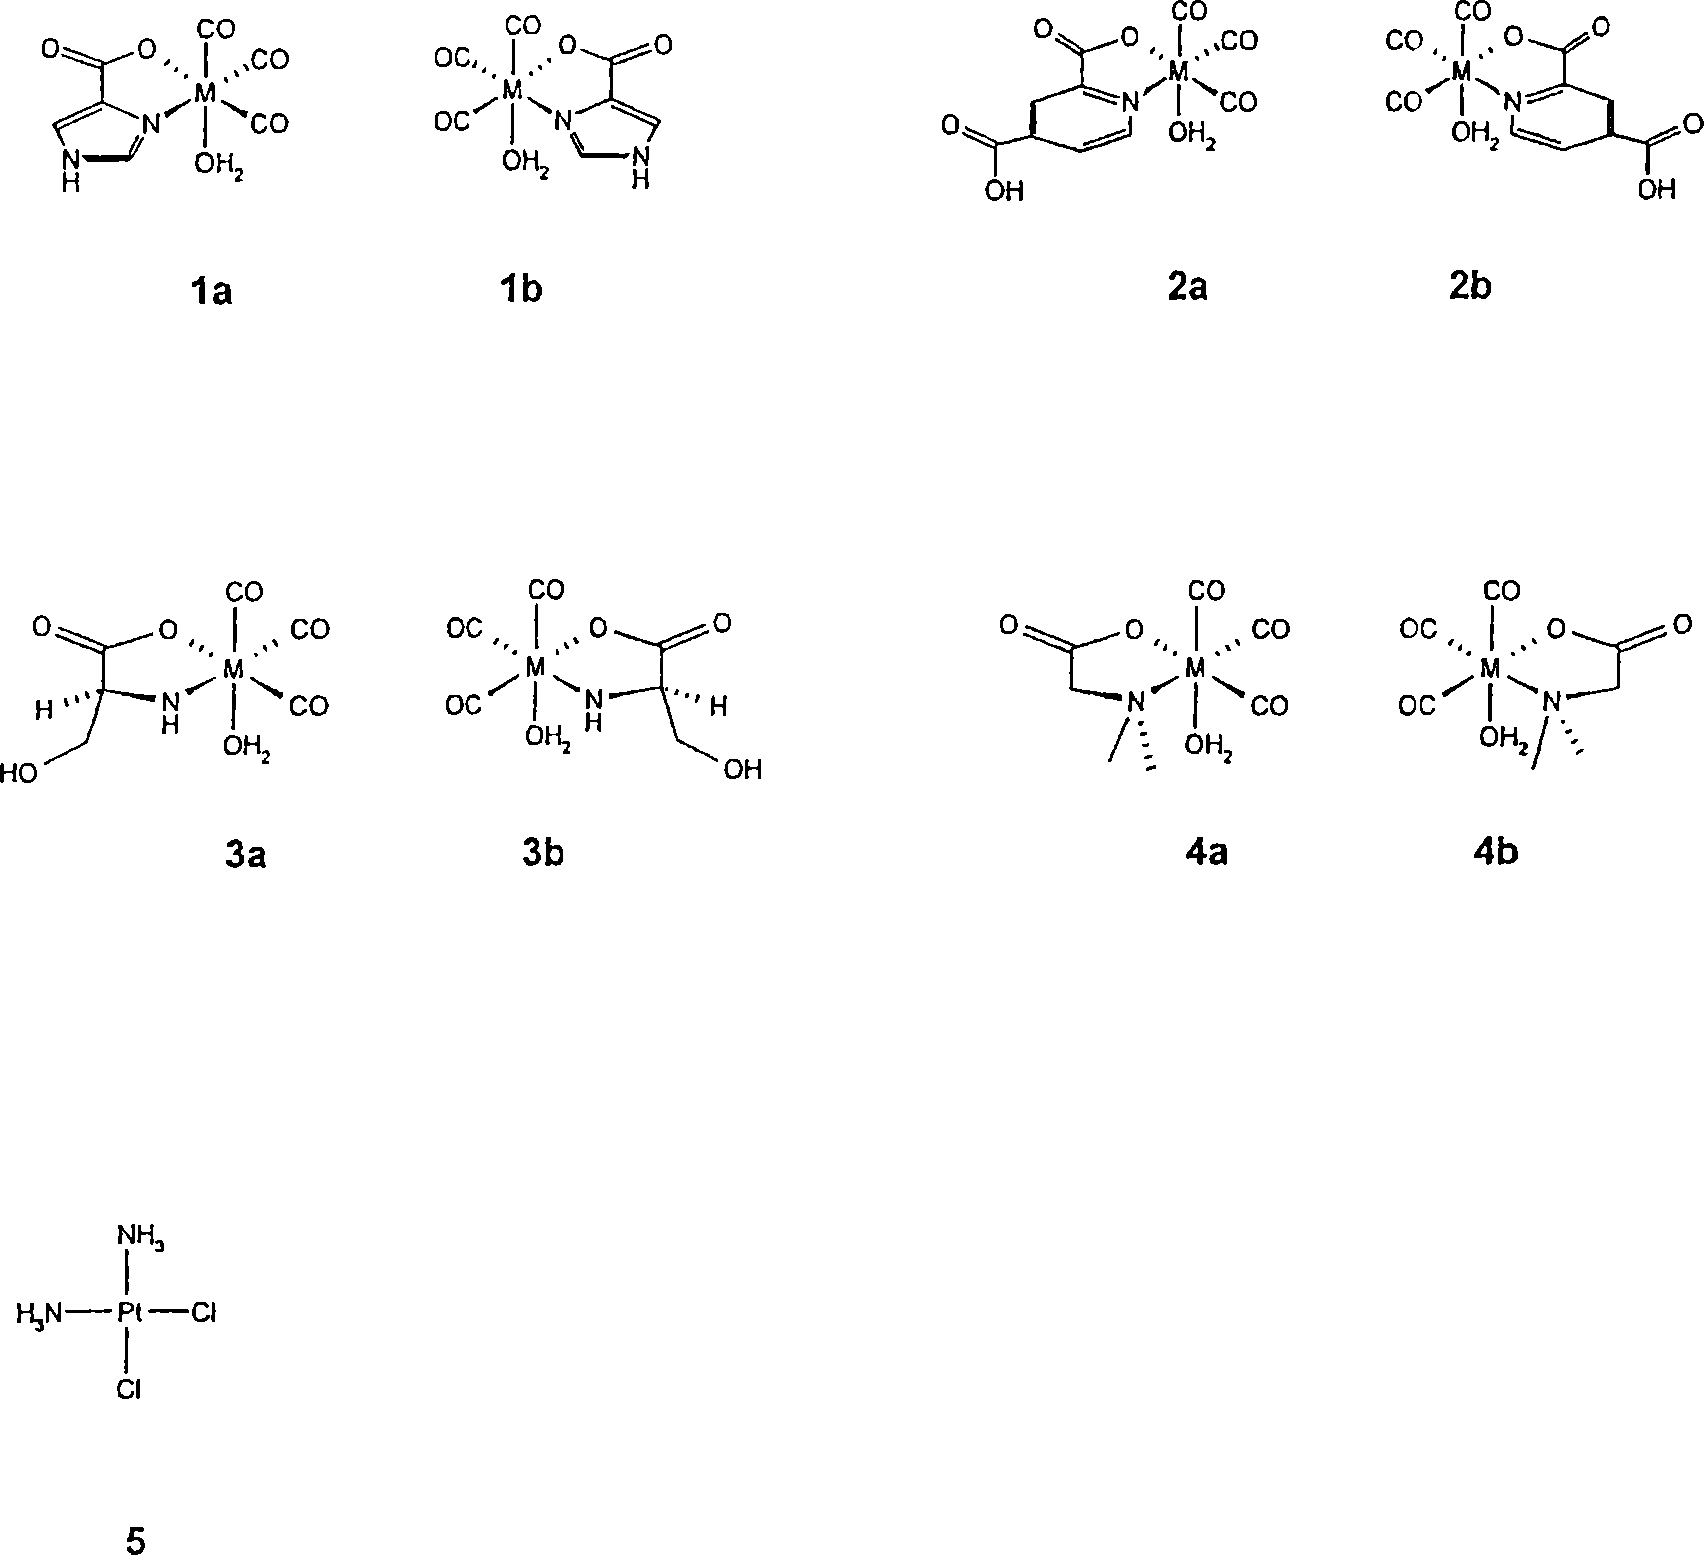 Metal complexes having vitamin B12 as a ligand